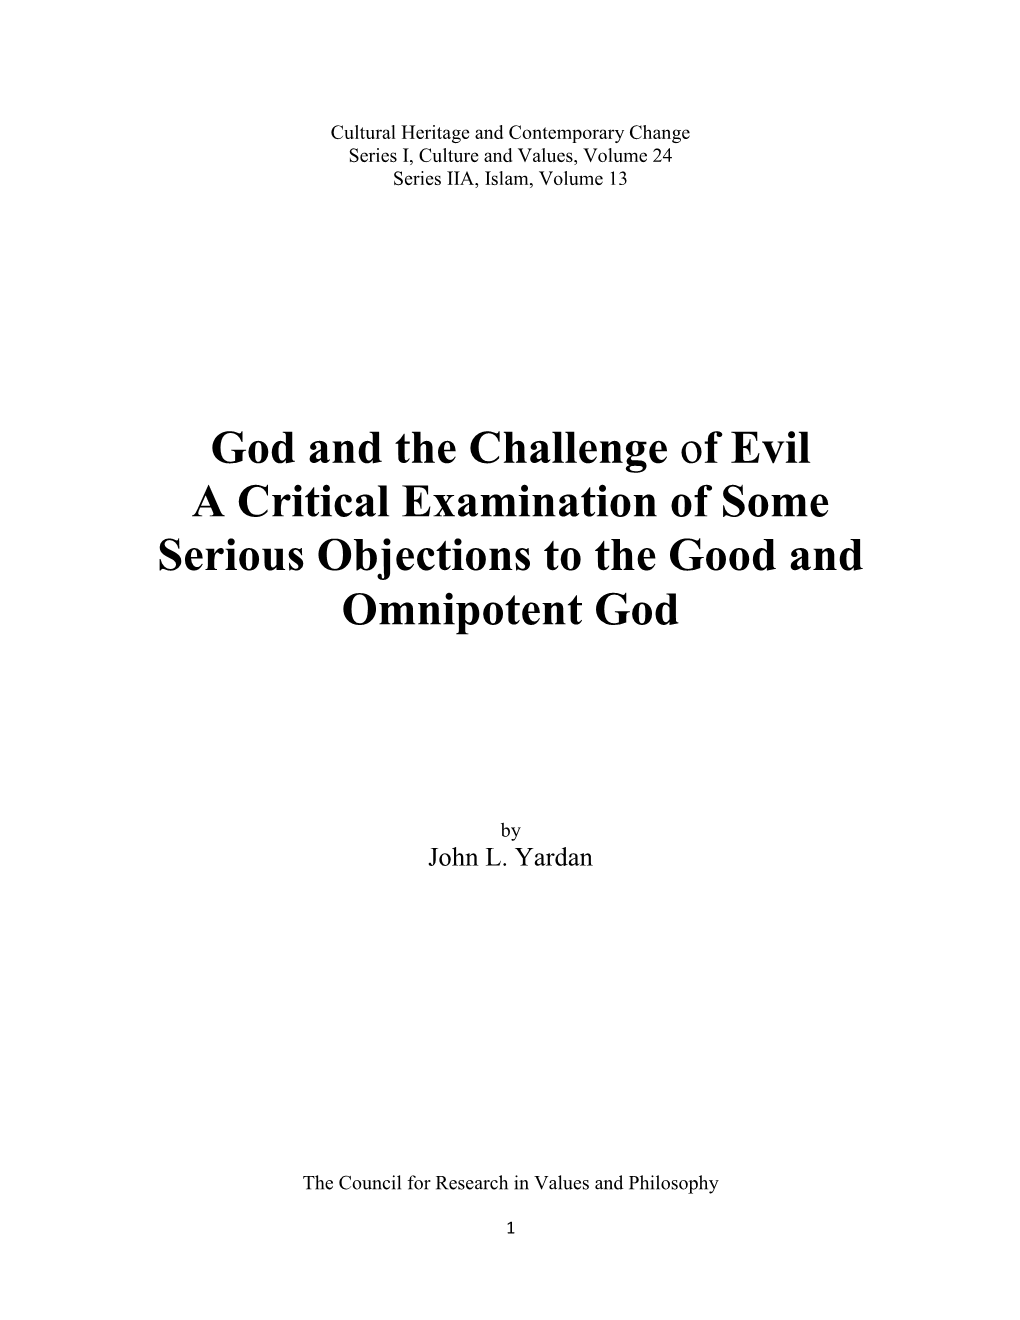 God and the Challenge of Evil a Critical Examination of Some Serious Objections to the Good and Omnipotent God